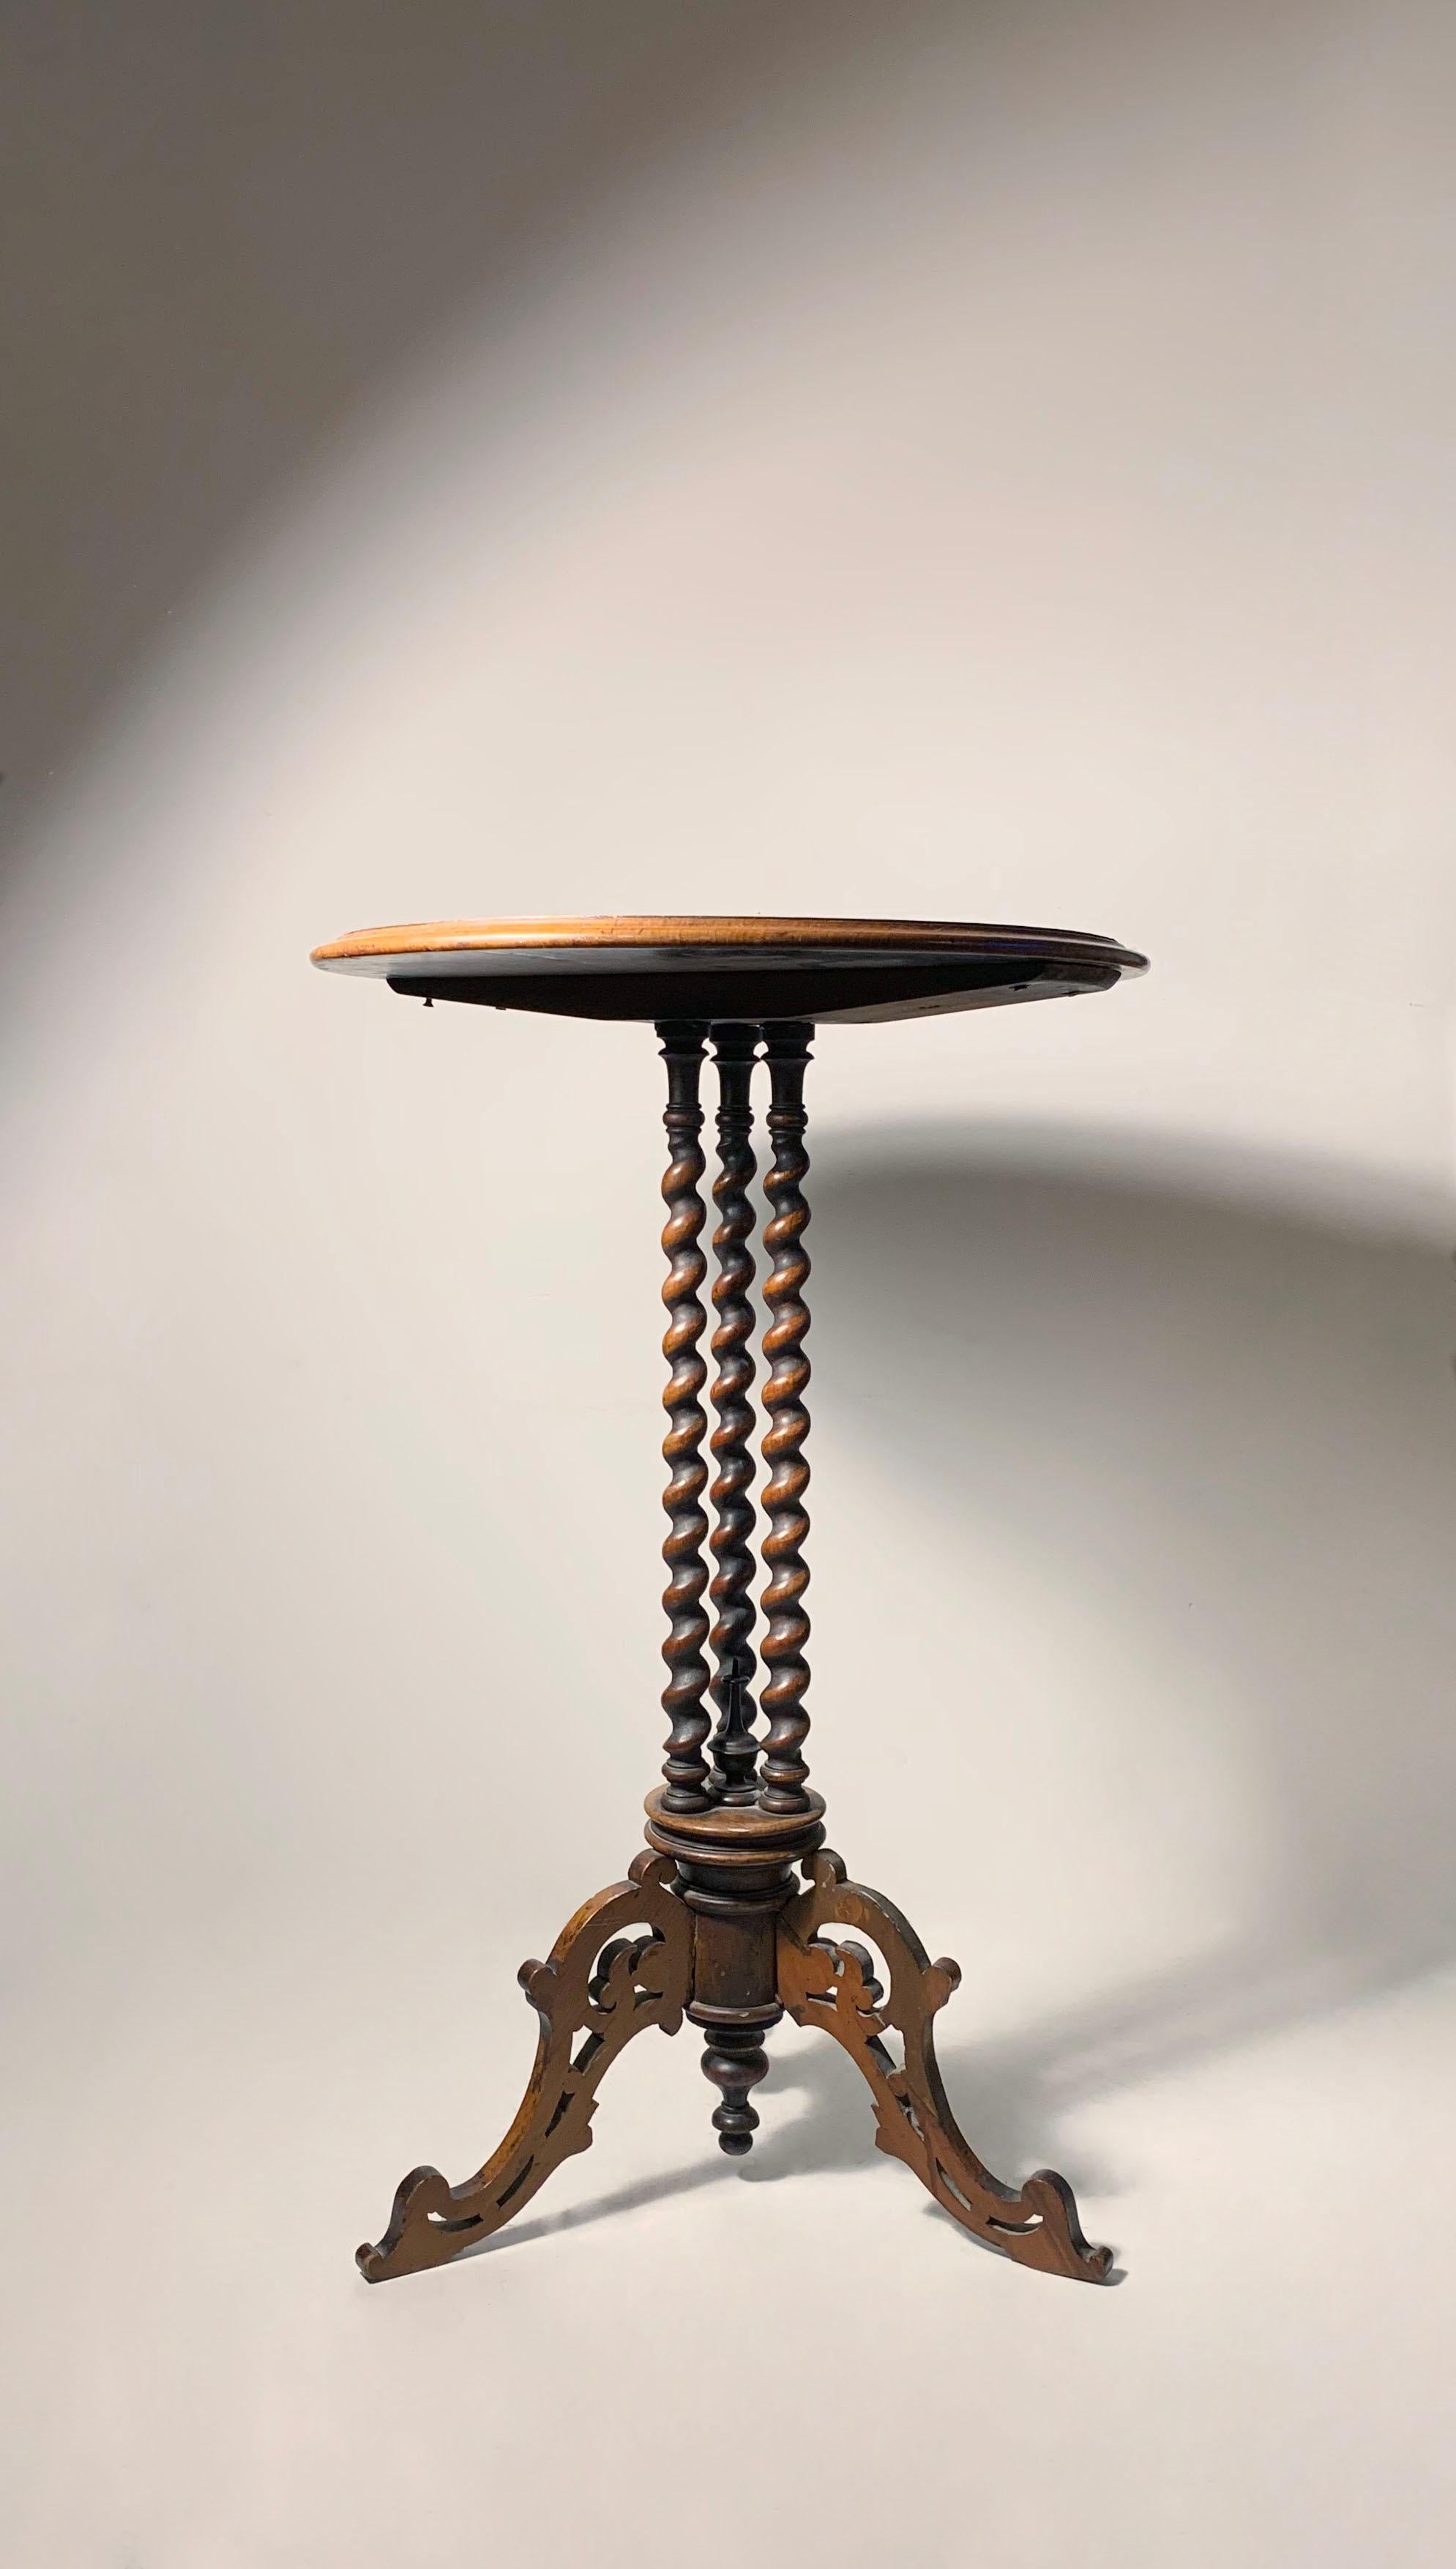 English A Fine Candle Stand Table by Johnstone & Jeanes of London For Sale